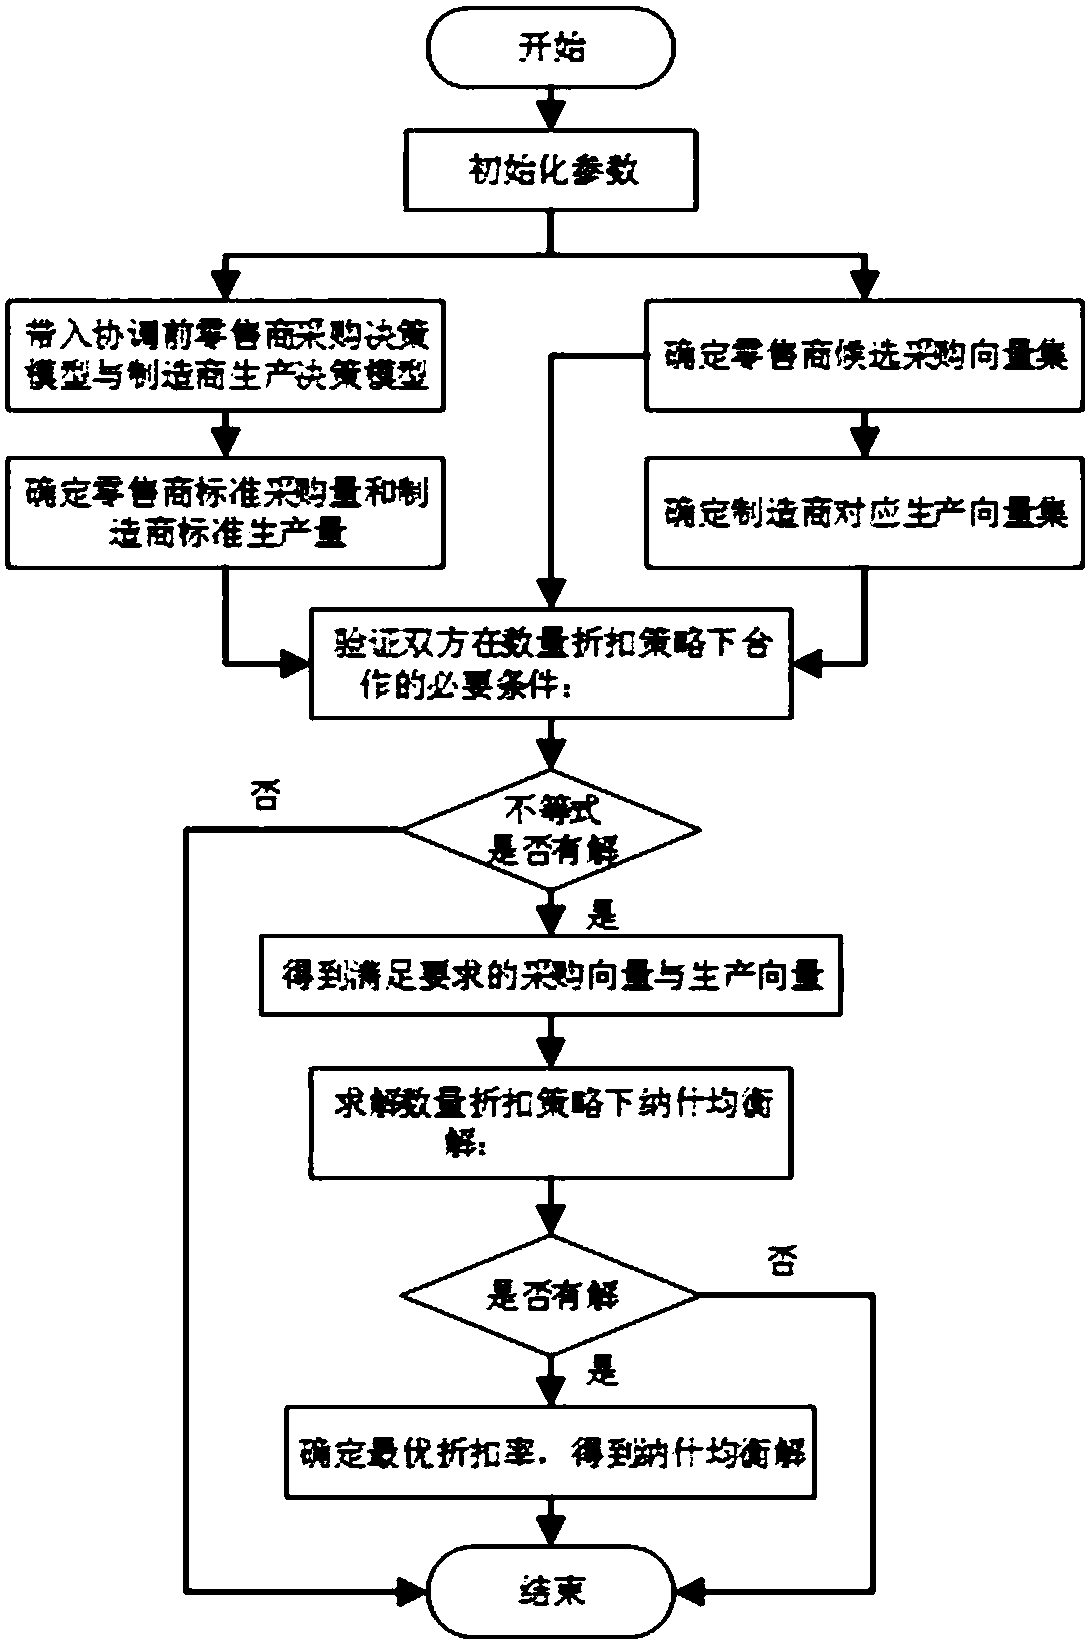 Two-stage supply chain coordination method based on quantity discount contract under information symmetry condition